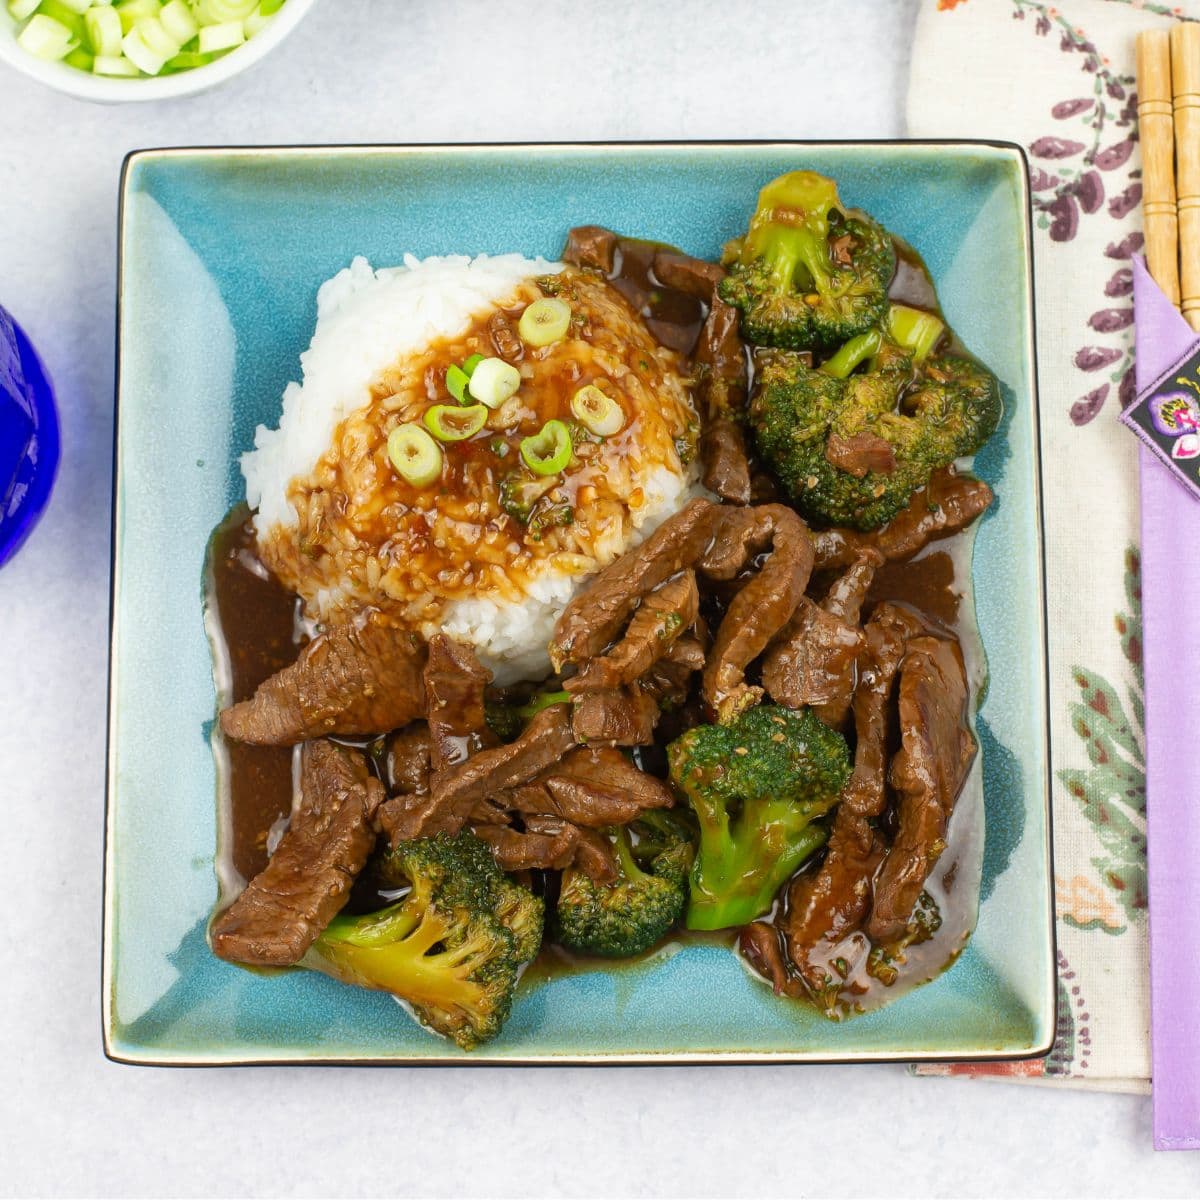 Instant Pot Beef and Broccoli served with white rice and garnished with green onions.